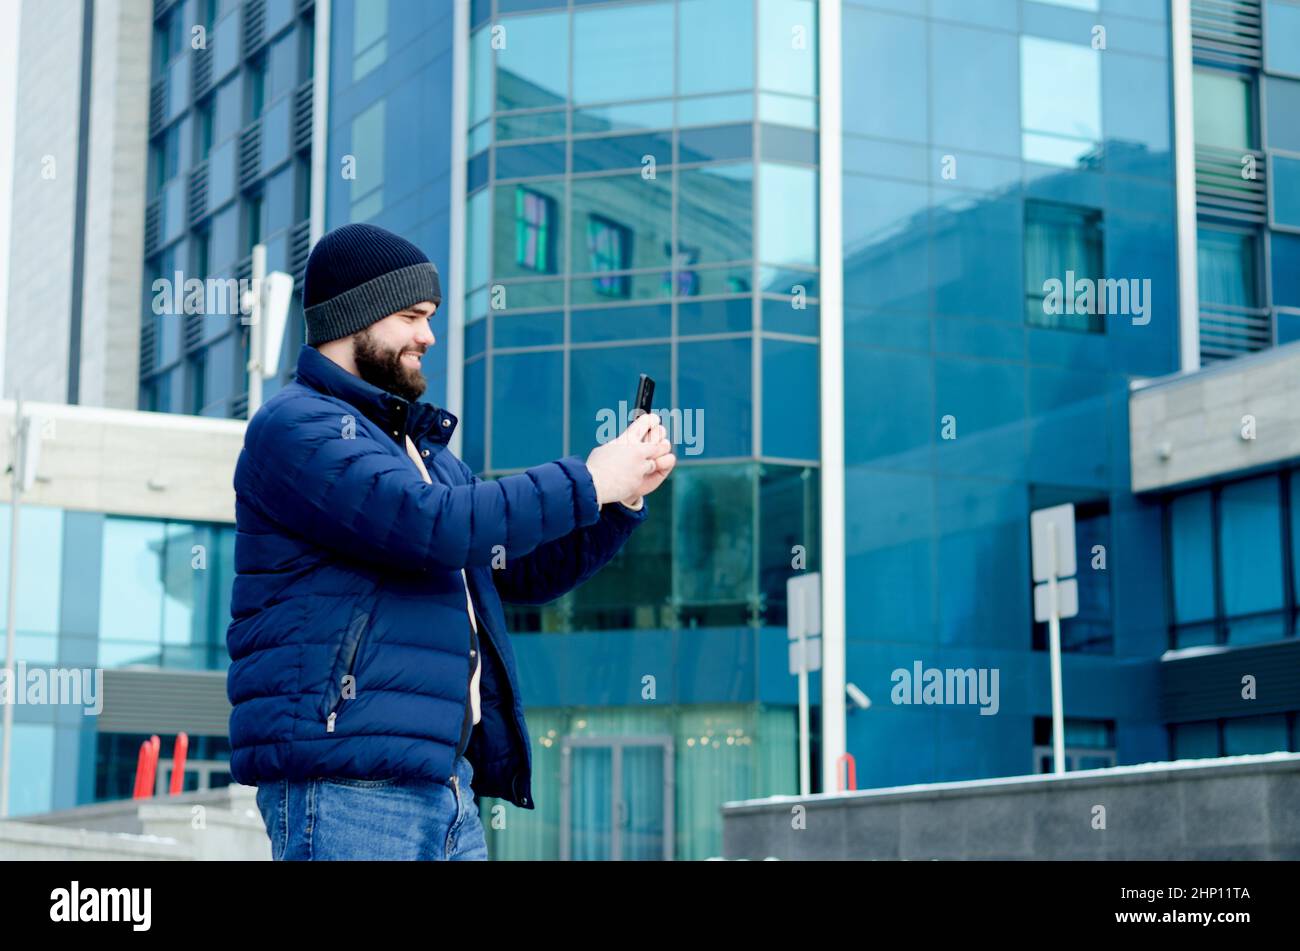 young elegant business man in winter casual clothes, jacket, hat. Walking in the city street, talking on the phone, making selfie. Working outdoor. Stock Photo